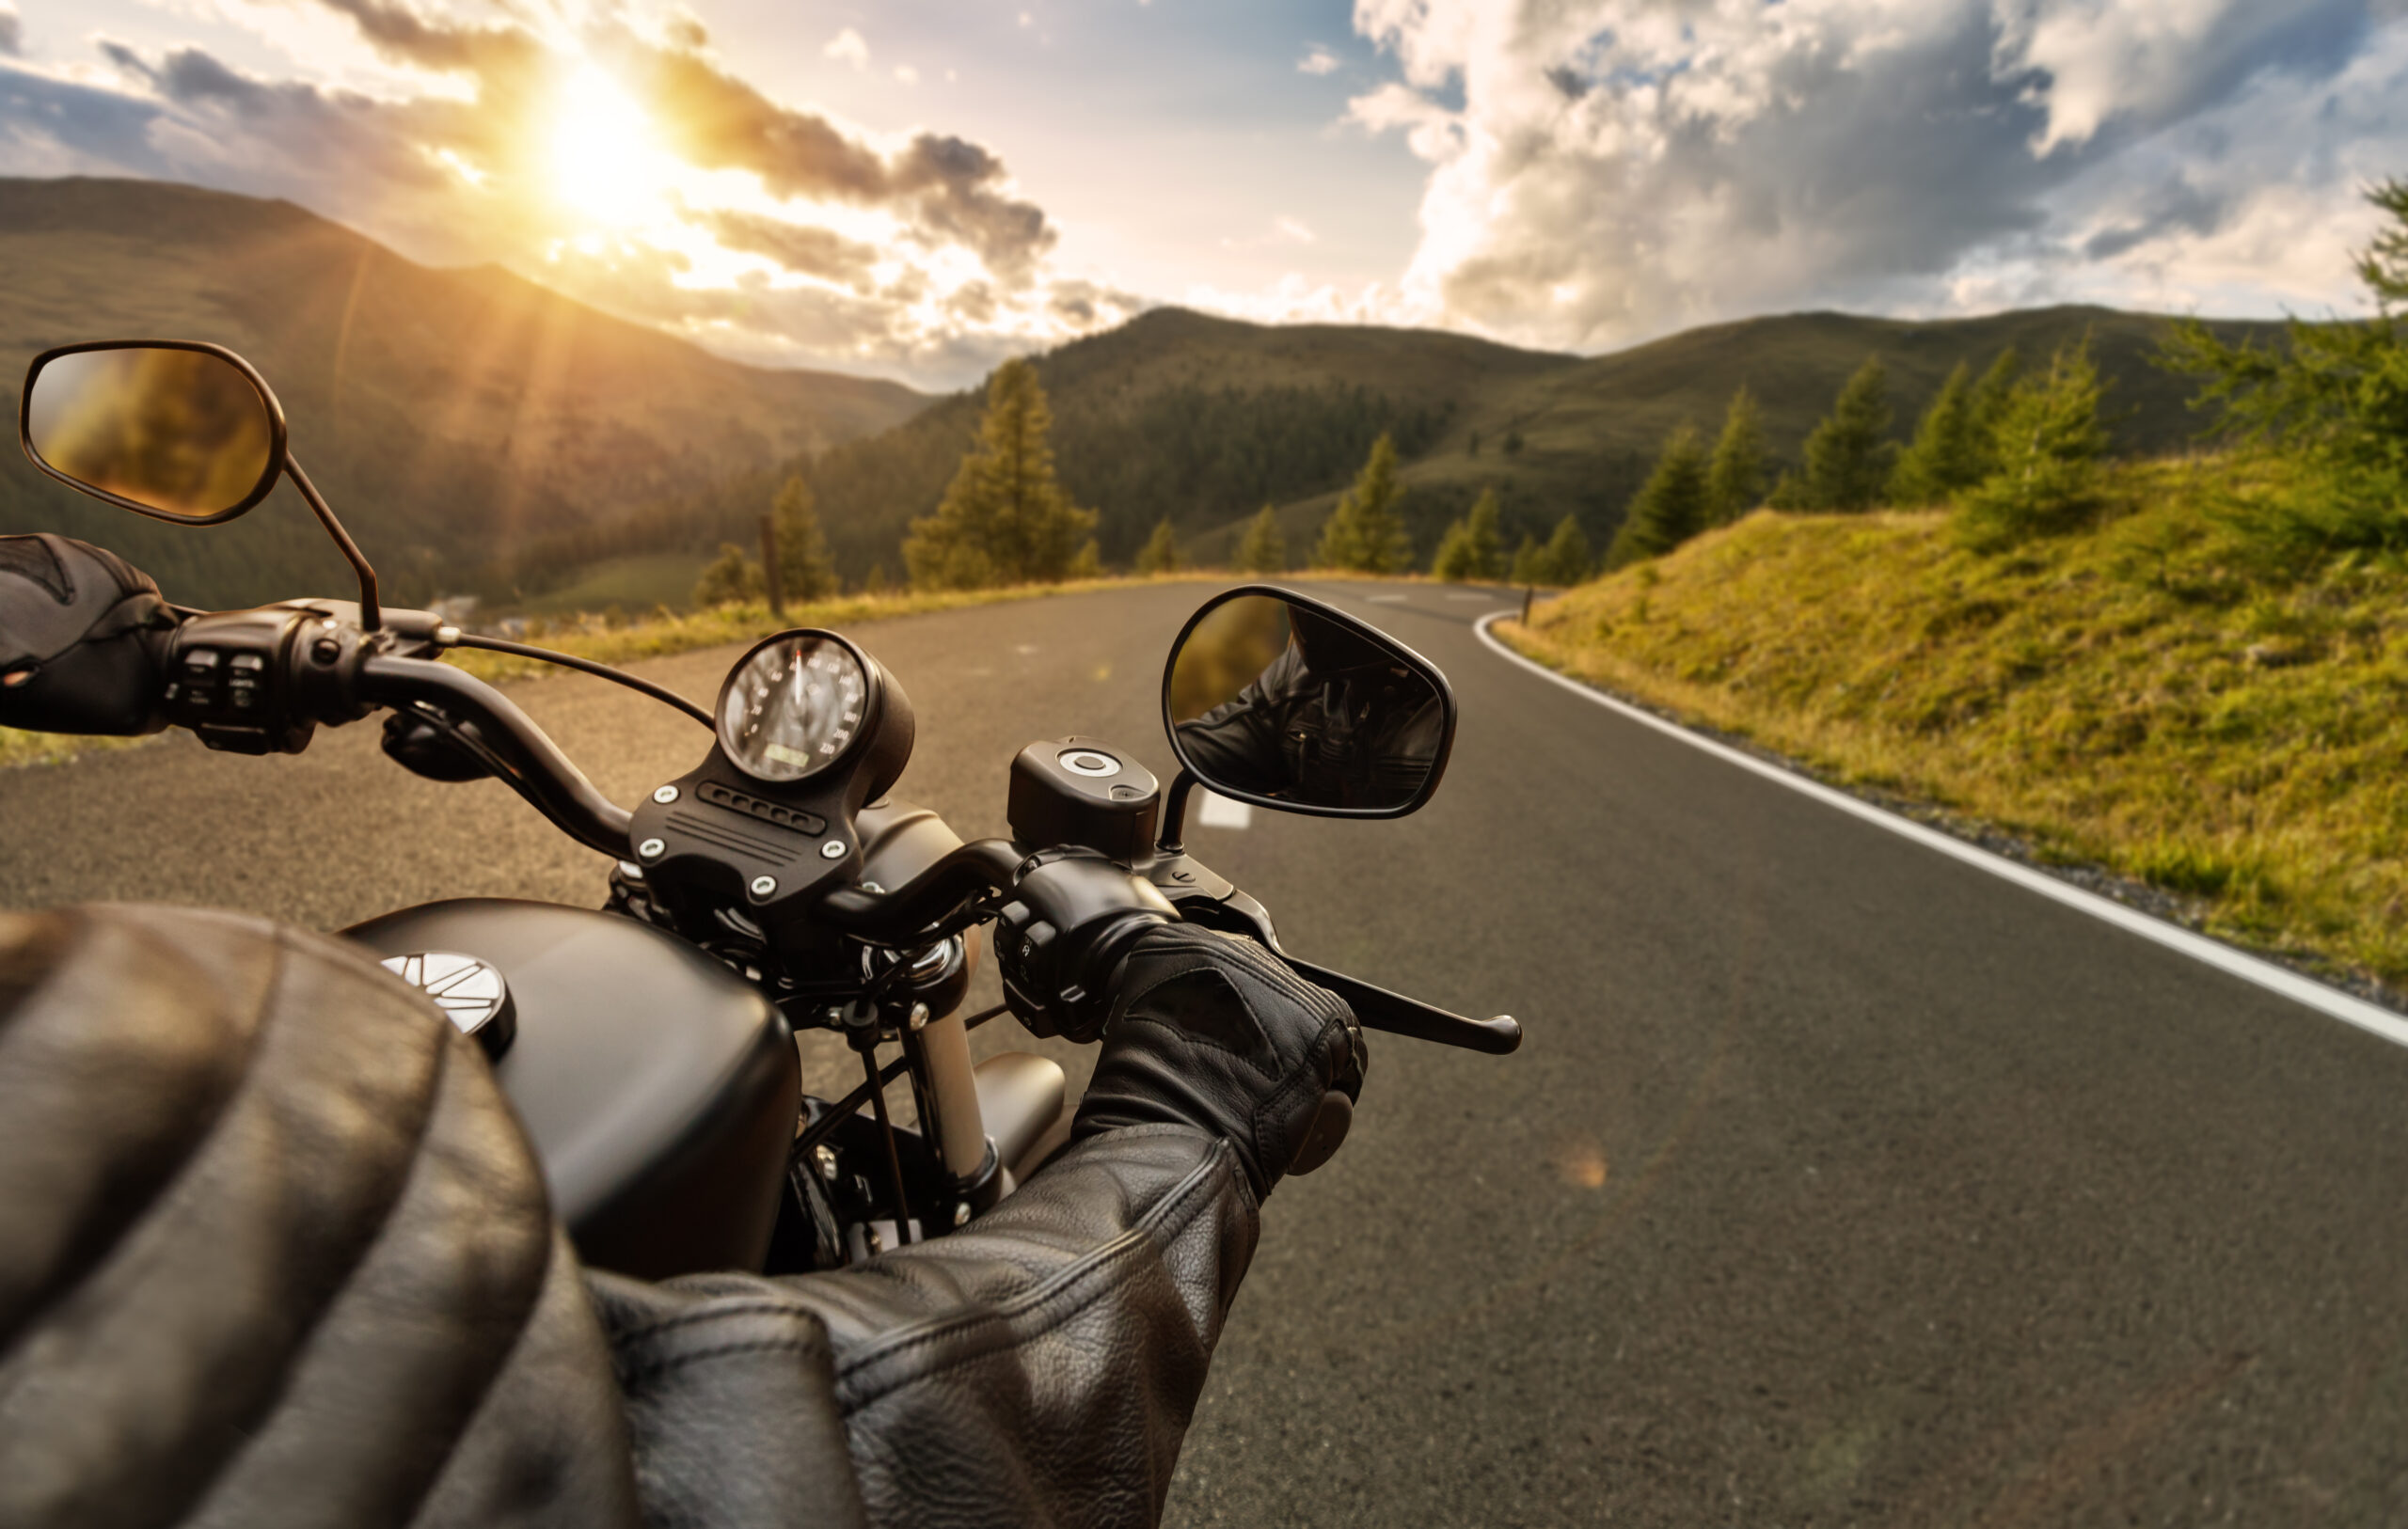 point of view photo of a motorcycle rider on an open highway in green mountainous terrain